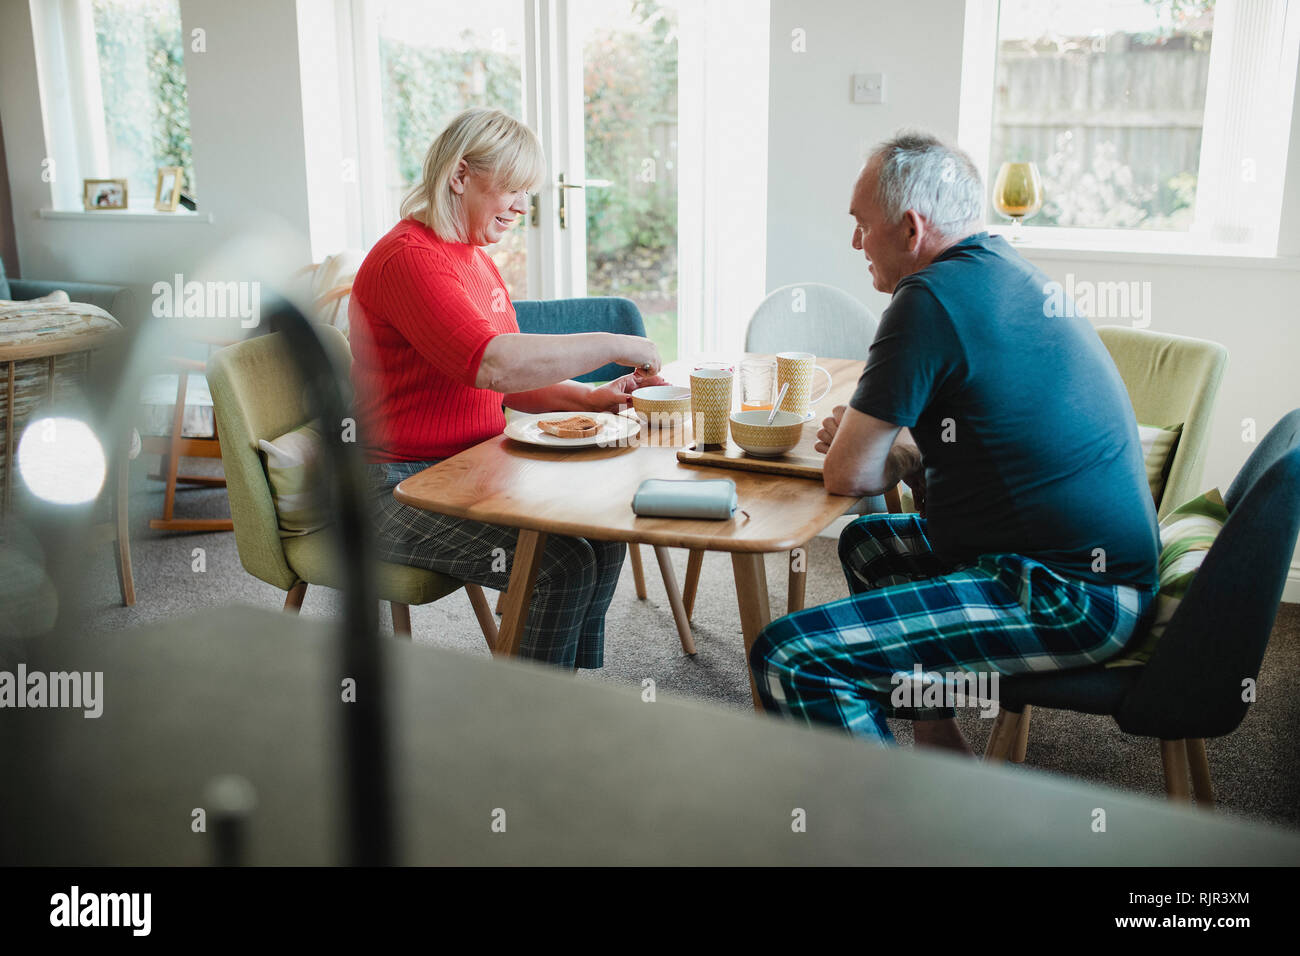 Mature couple are having breakfast together at the dining table in their home. Stock Photo